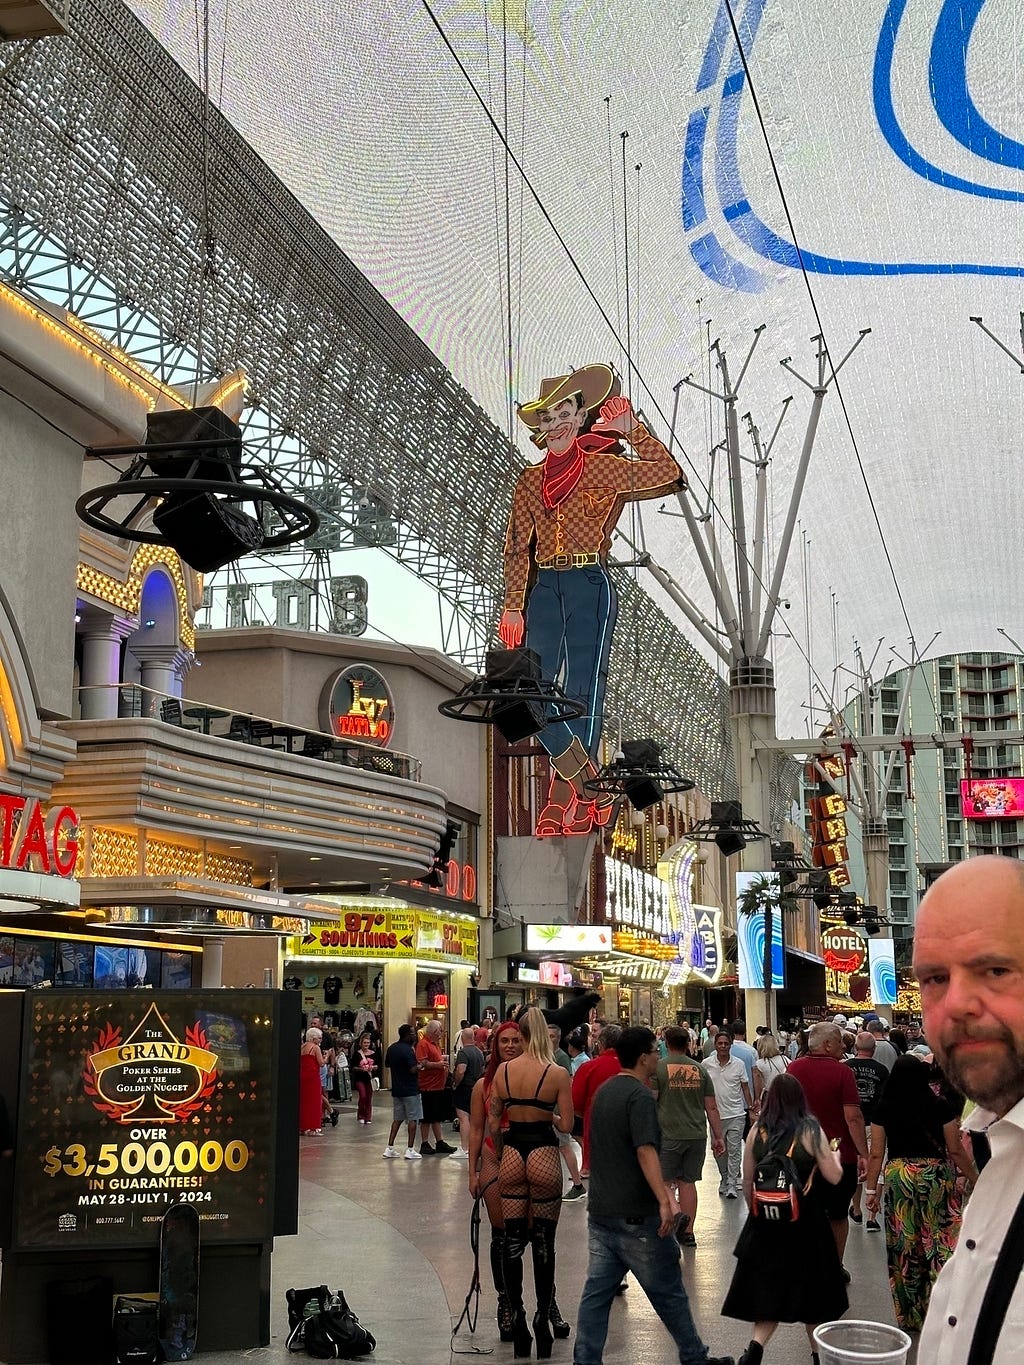 A busy street scene features a lit-up cowboy sign, various shops, a large digital advertisement, and a crowd of people, one person wearing an attention-grabbing outfit.